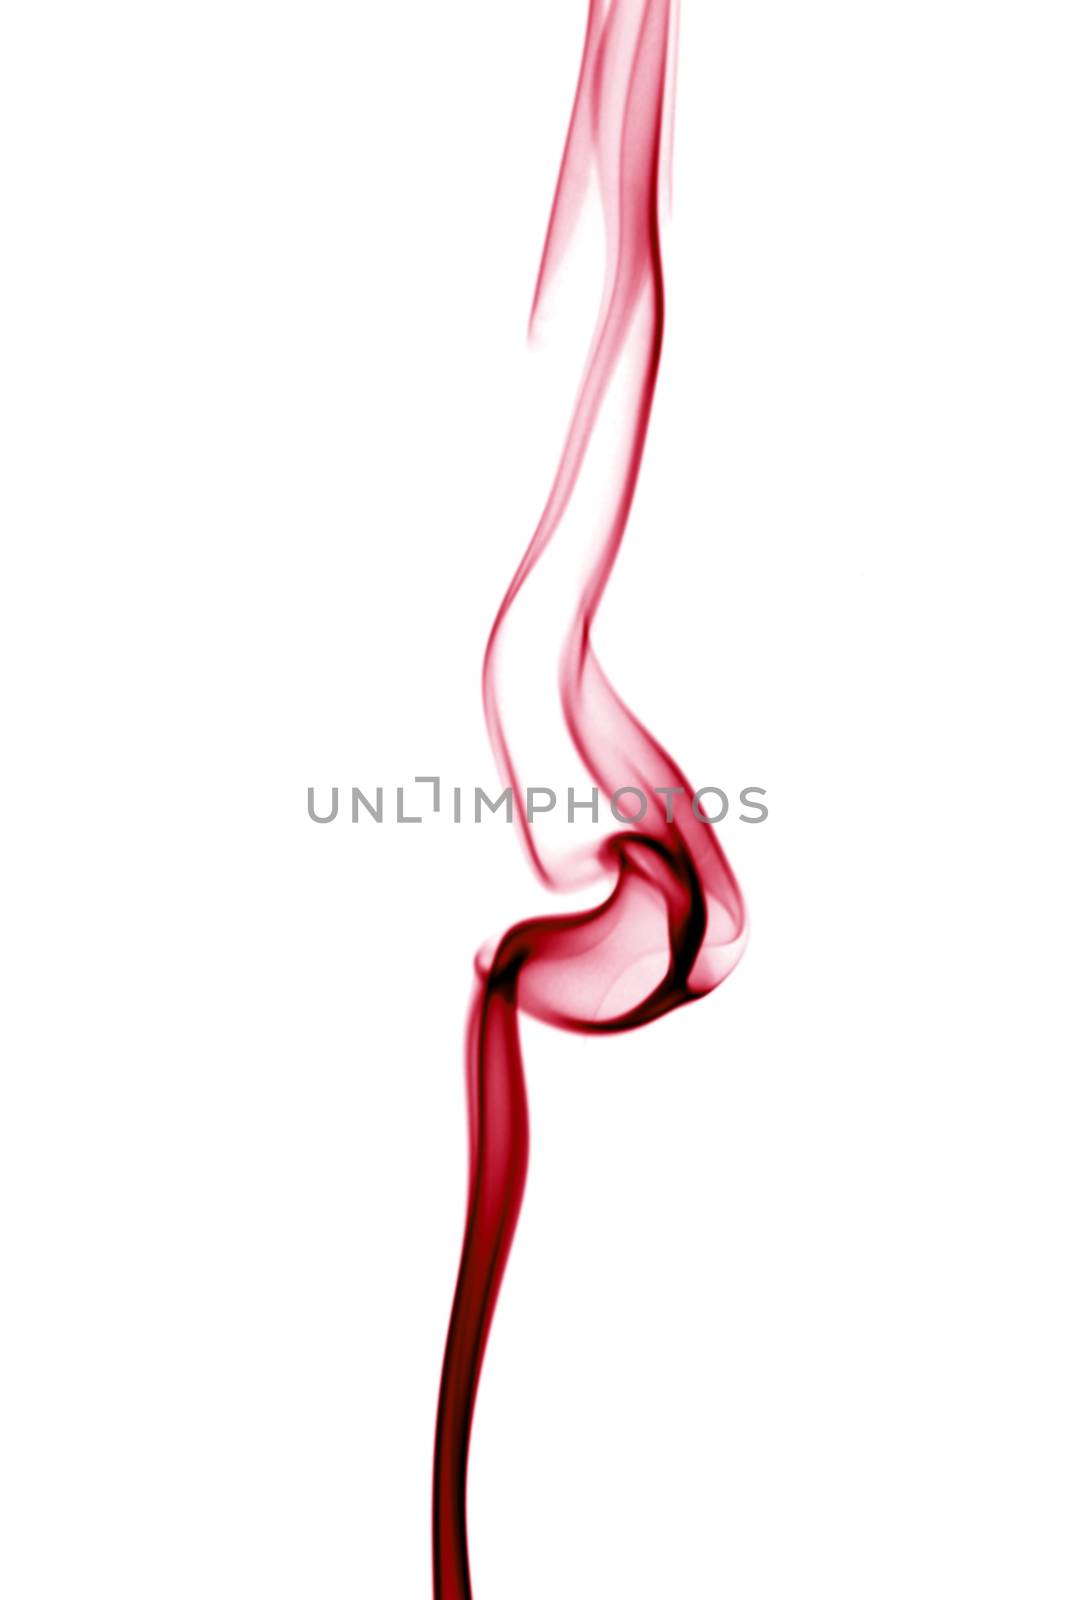 red smoke abstract background close up